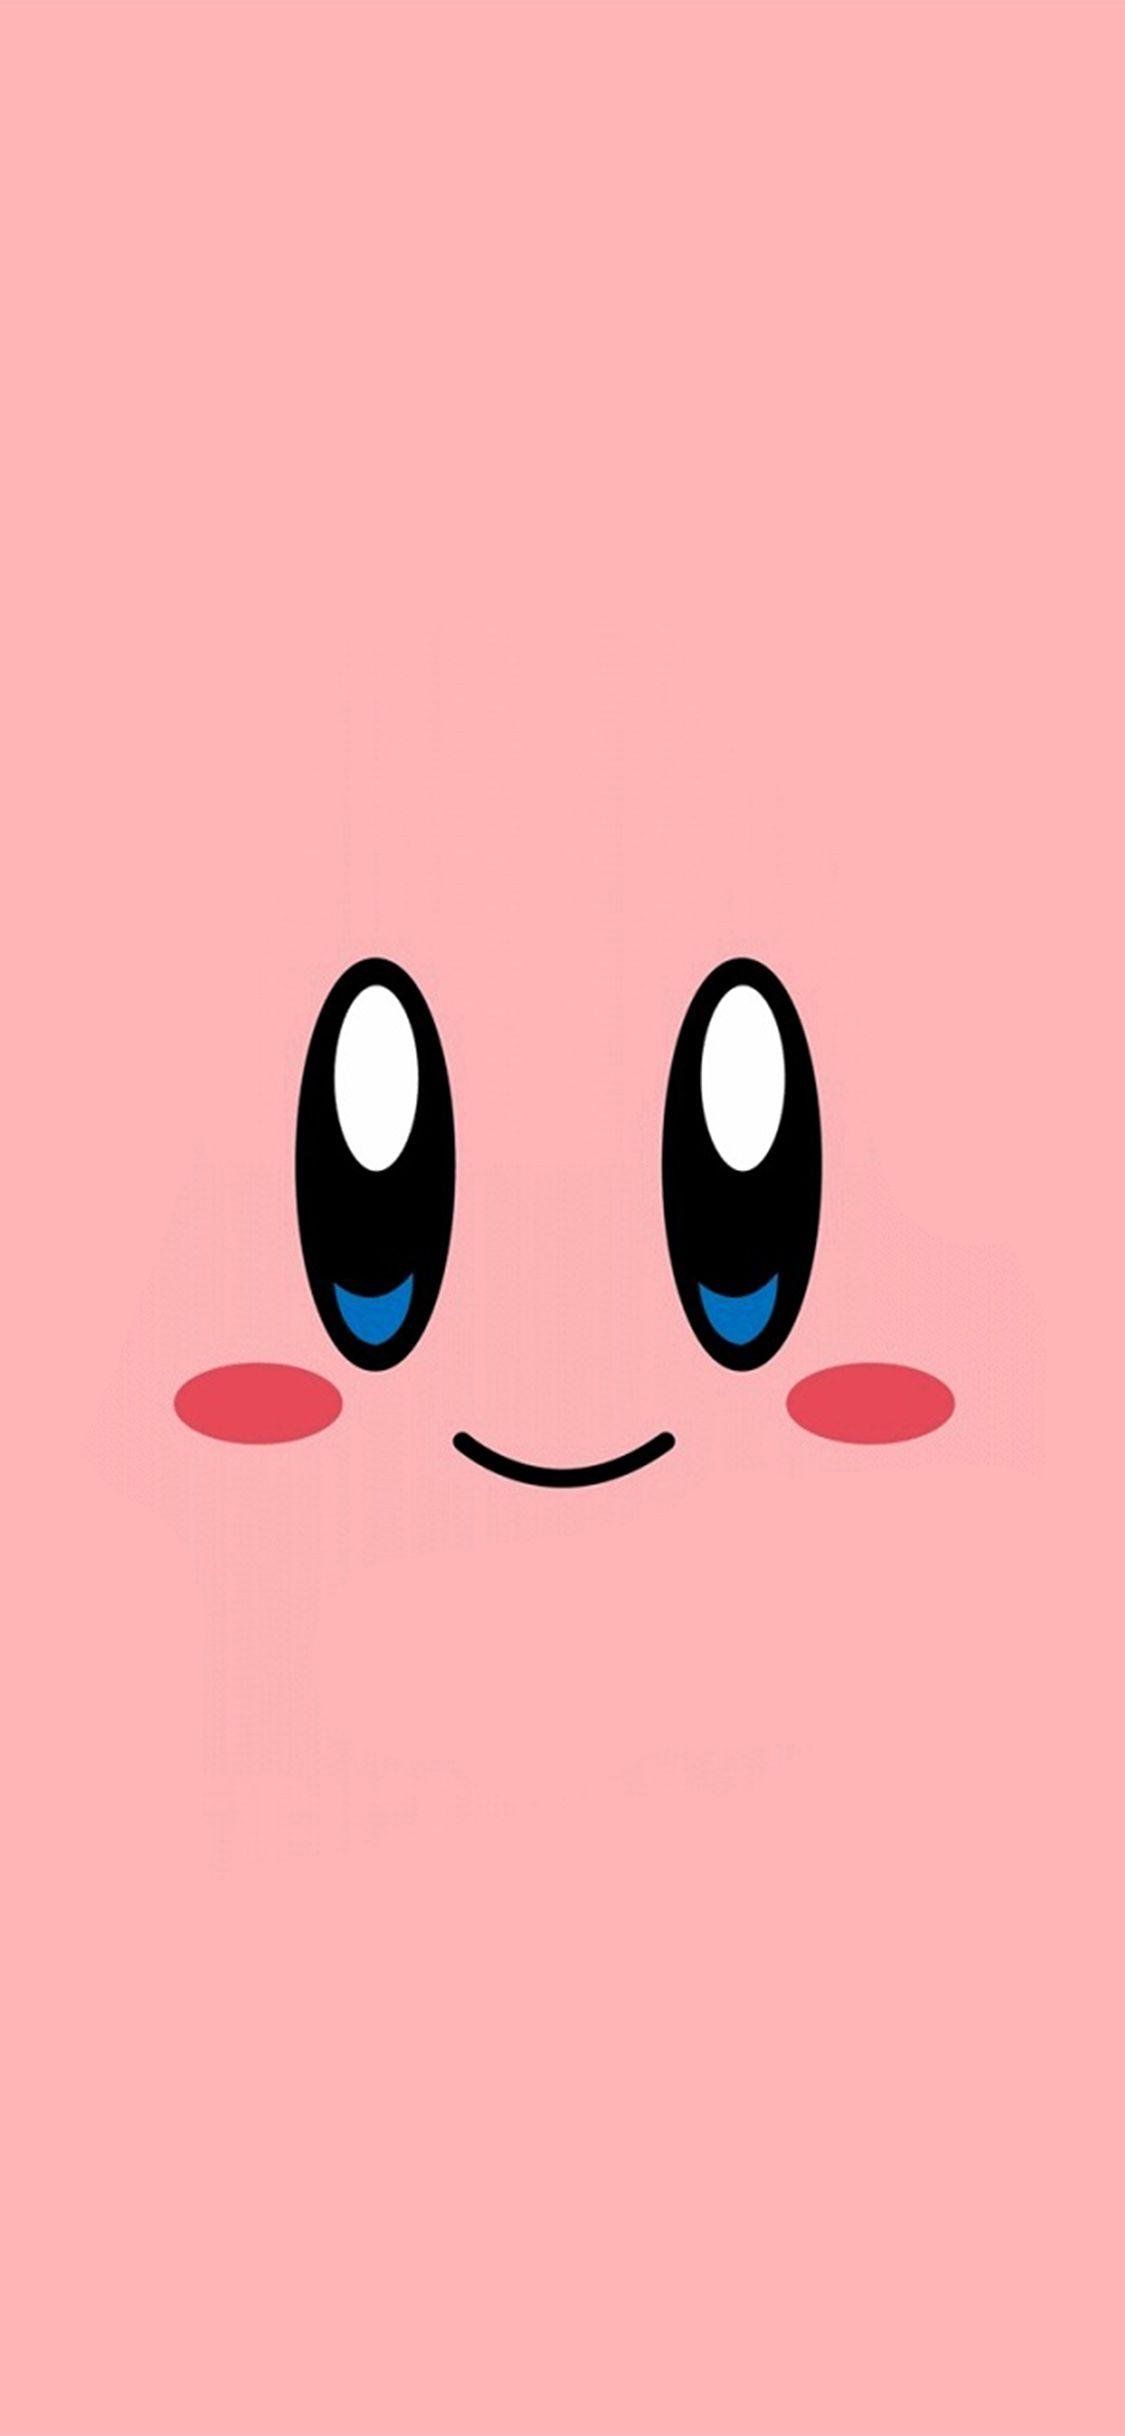 Kirby is a pink character with two black eyes and two pink cheeks. - Kirby